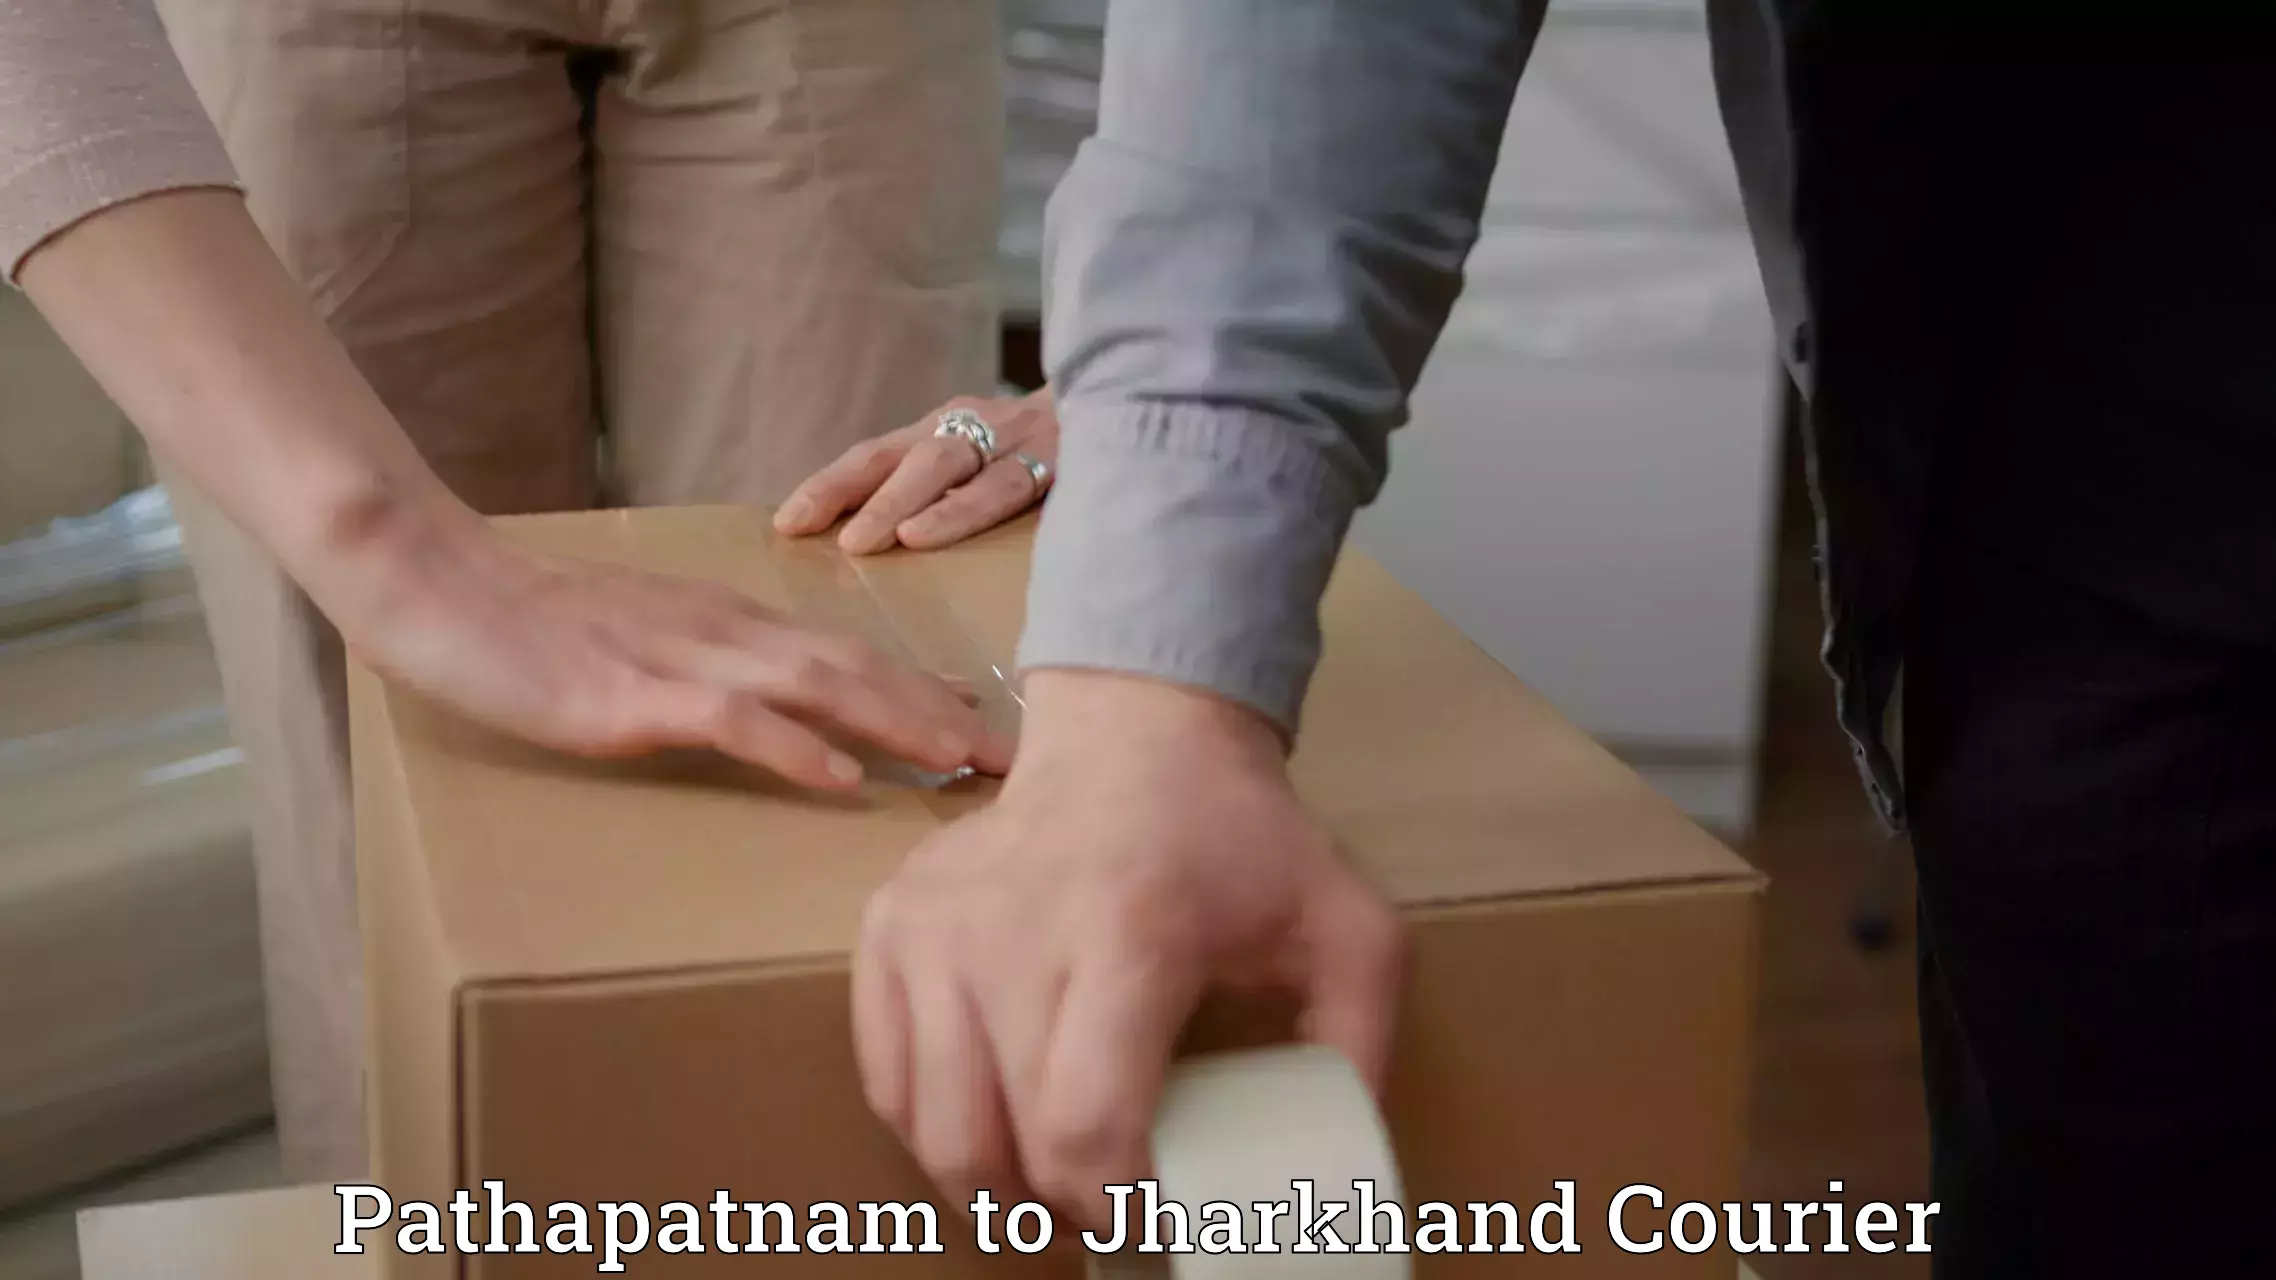 Efficient cargo services Pathapatnam to Dhanbad